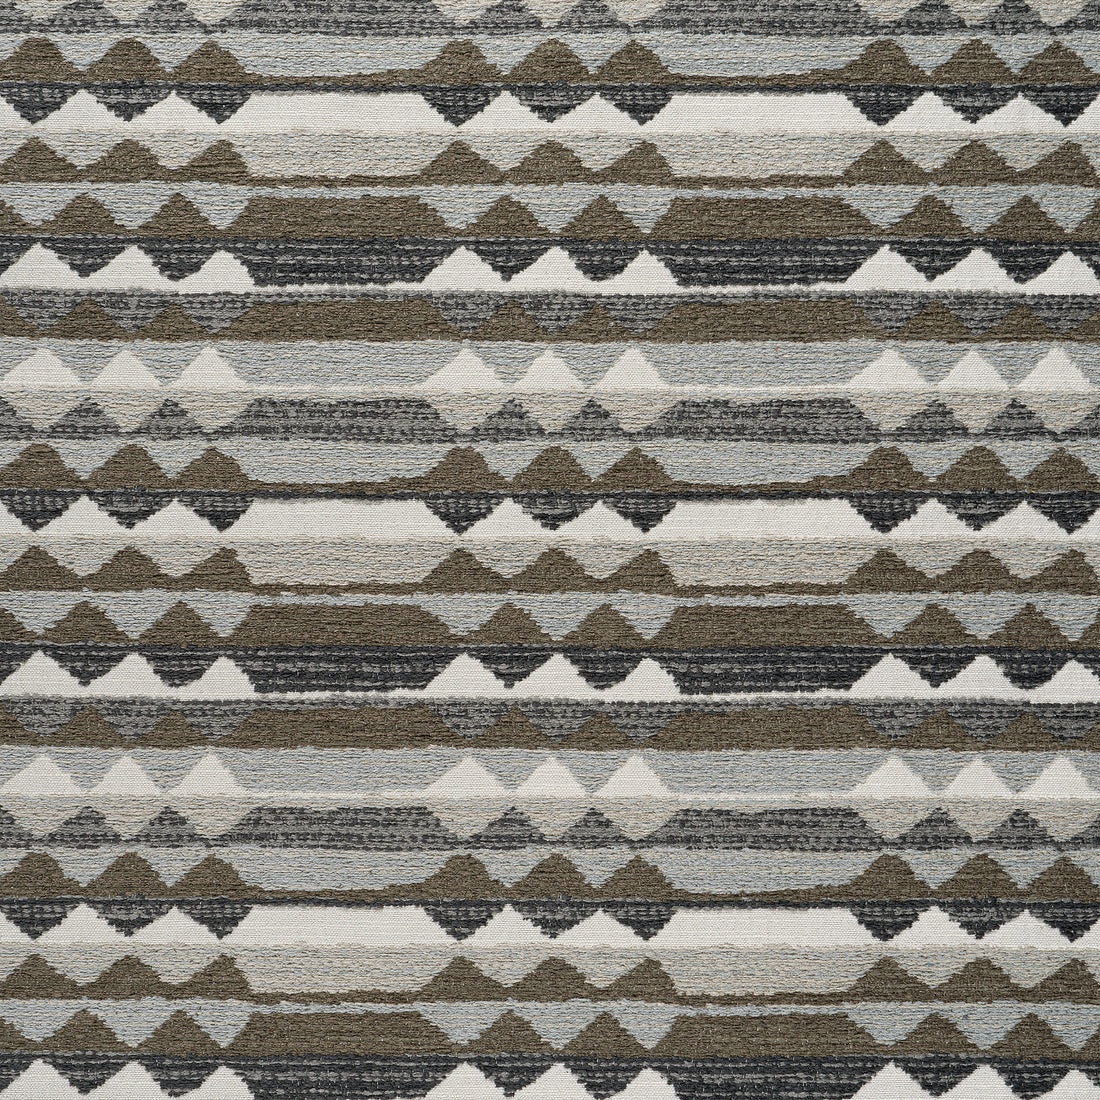 Saranac fabric in hickory color - pattern number W78375 - by Thibaut in the  Sierra collection